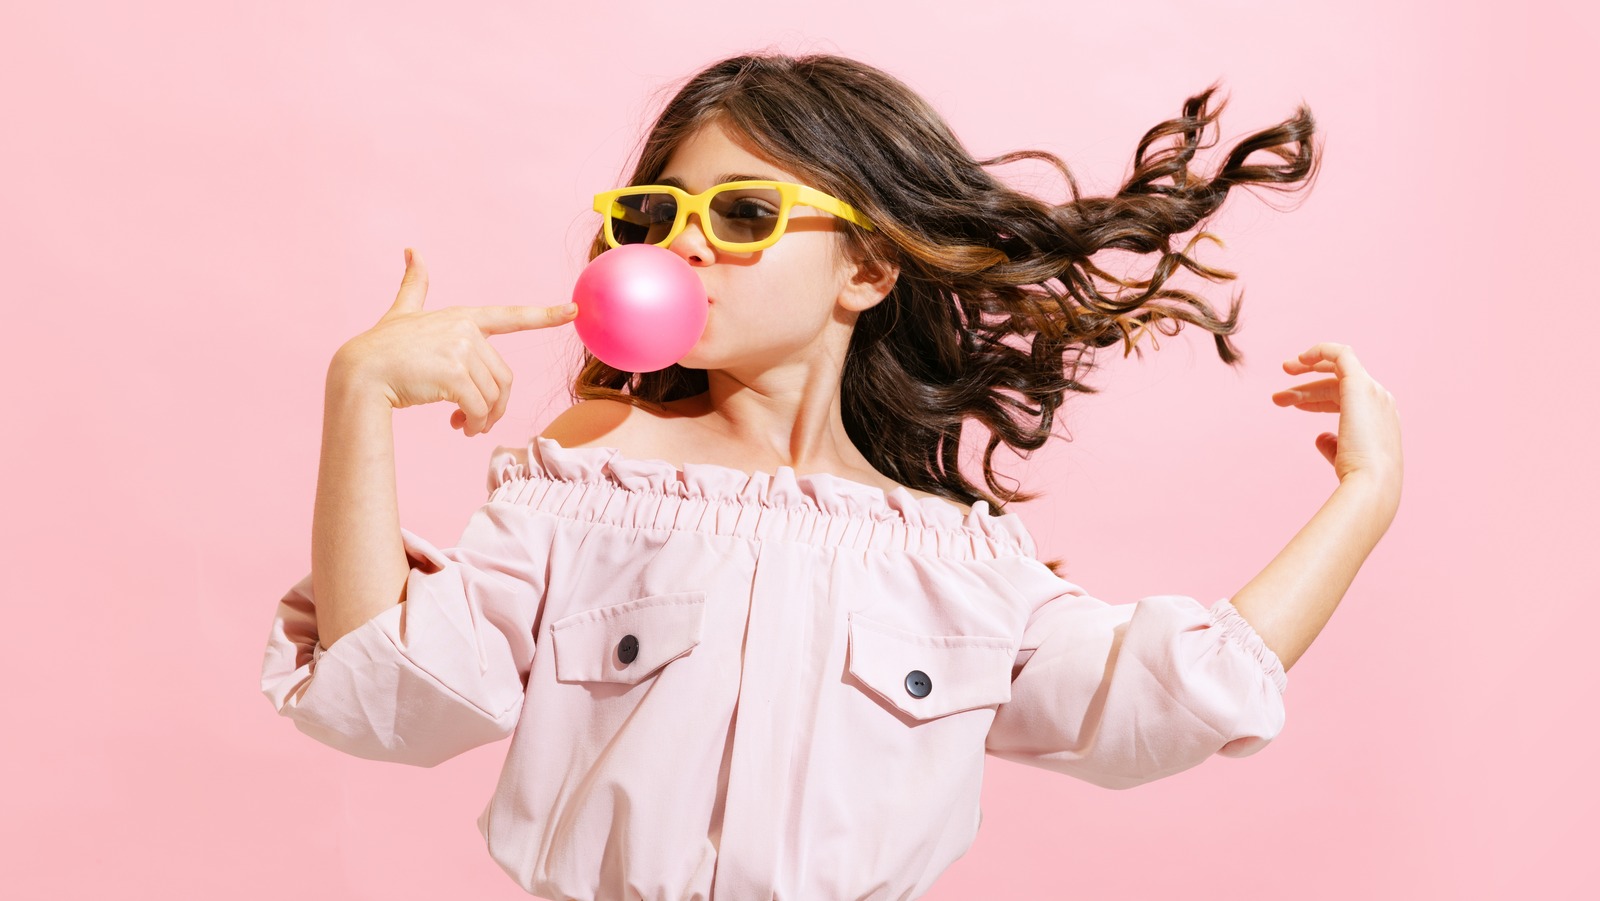 Here's Where Bubblegum Flavor Really Comes From